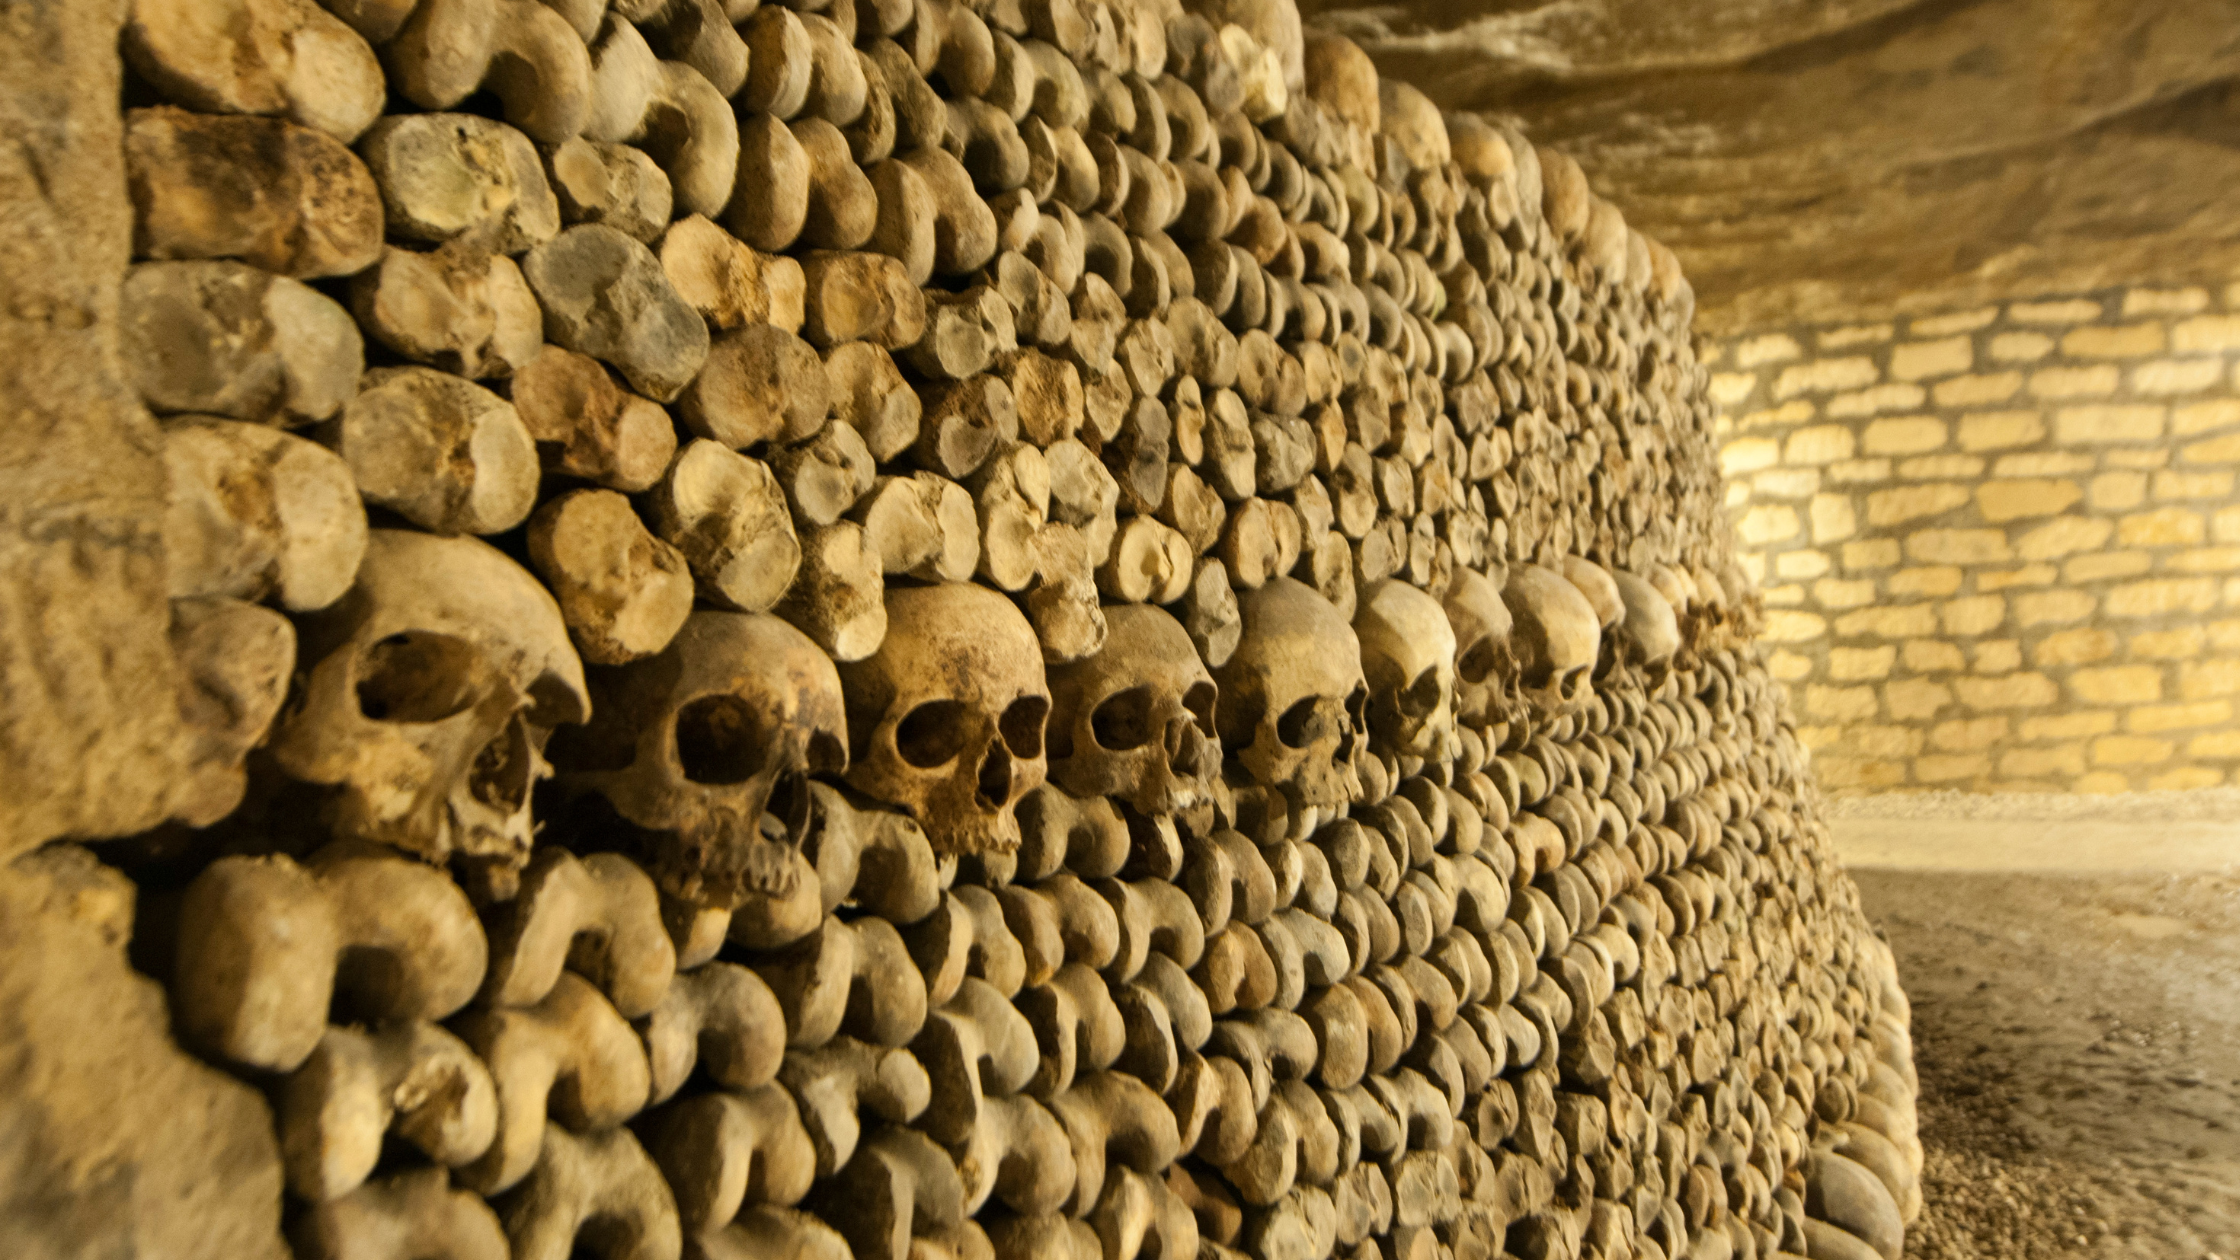 Paris catacombs: worth the hype? 